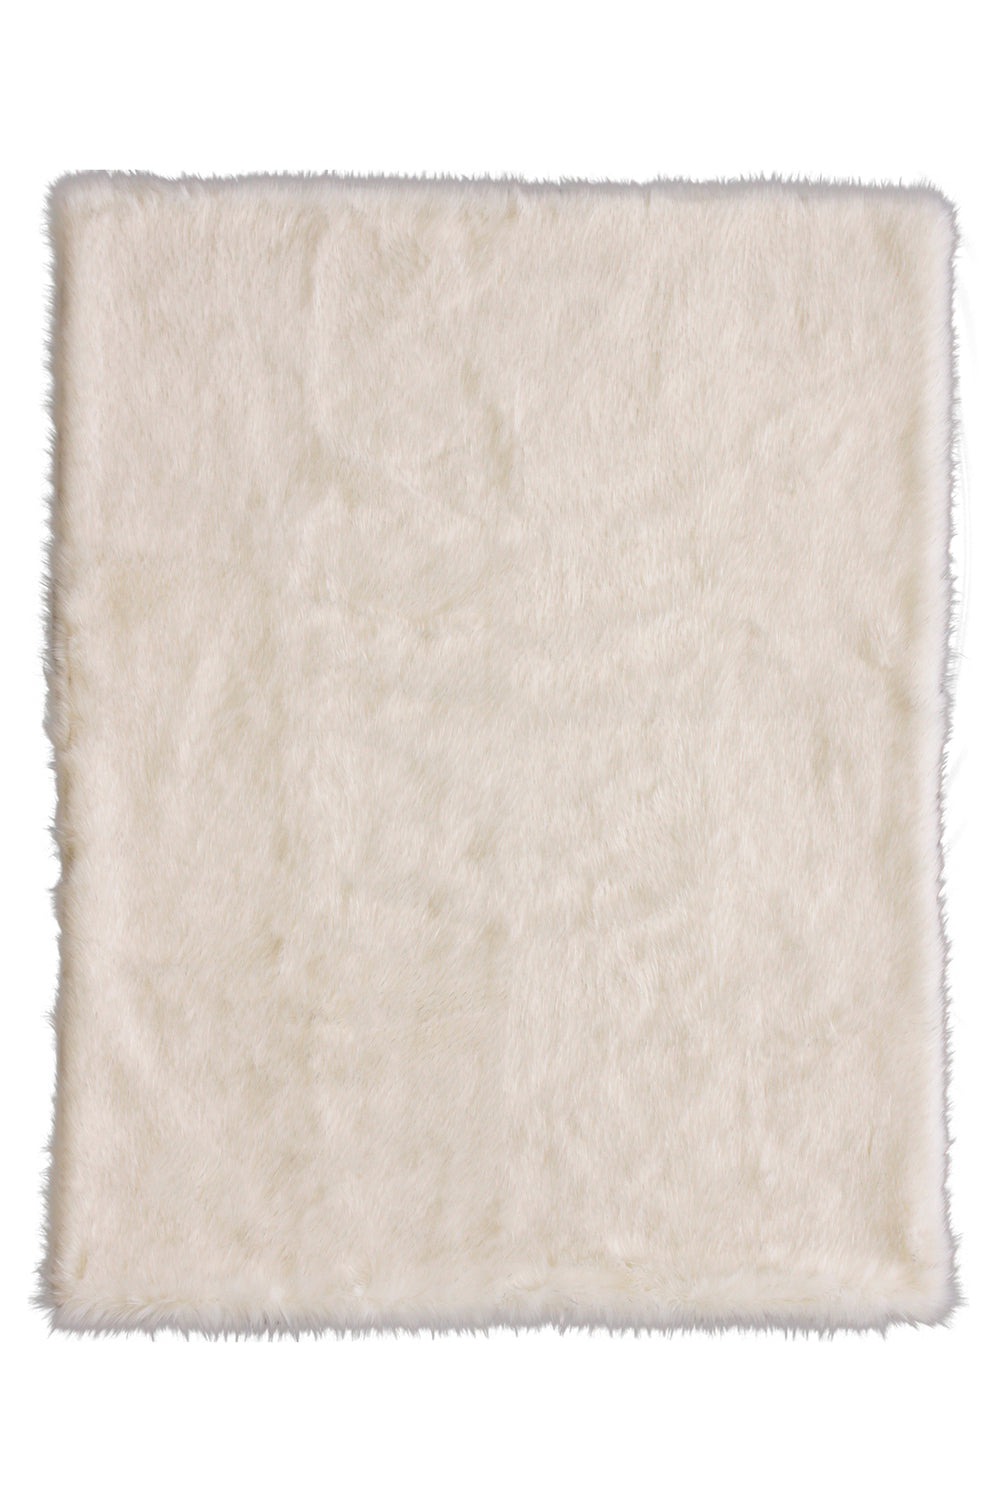 Luxury faux fur throw in pure white from Heirloom.  These are the best fake fur throws, super soft for NZ interior design